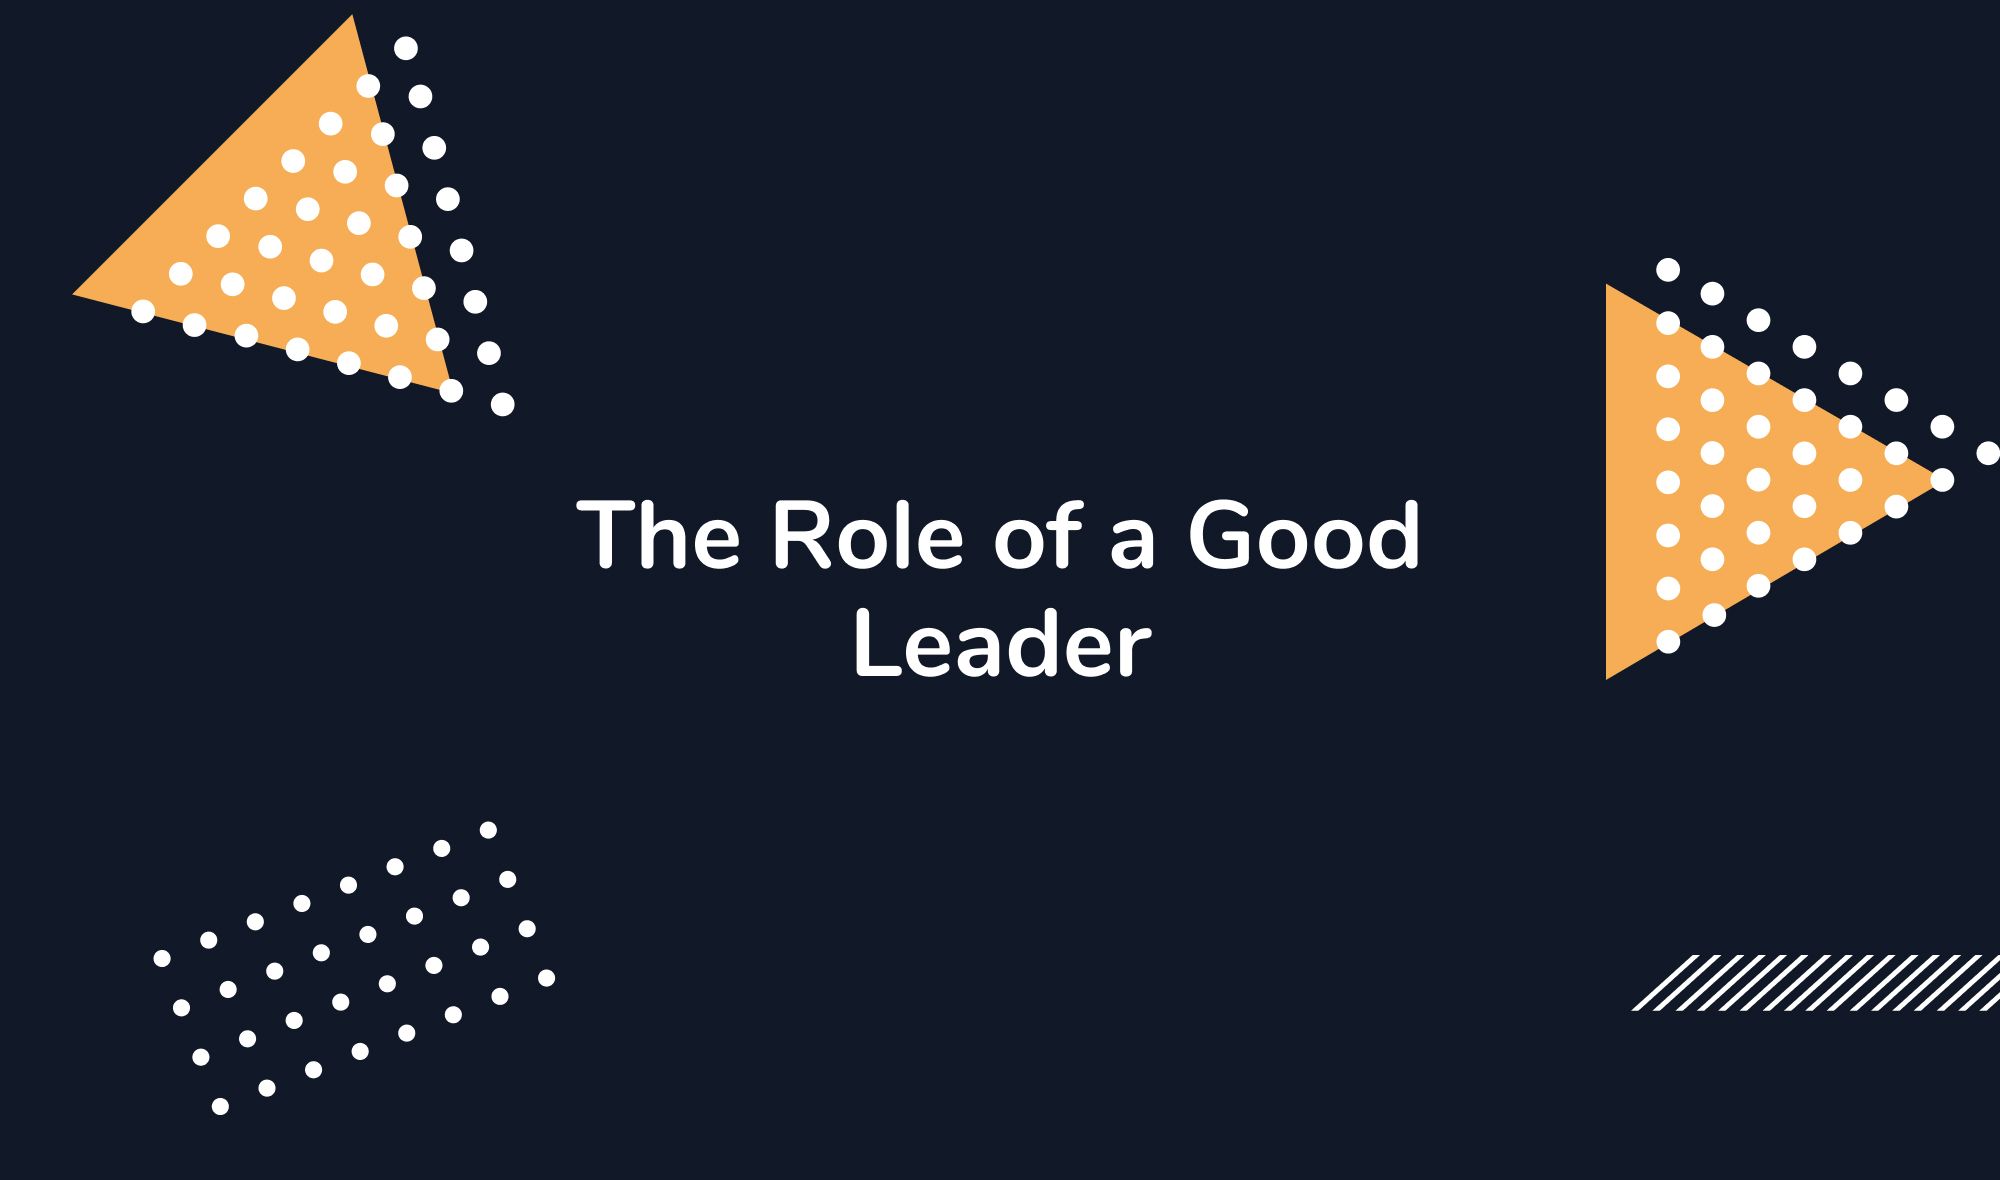 The Role of a Good Leader: Behaviors That Make a Difference